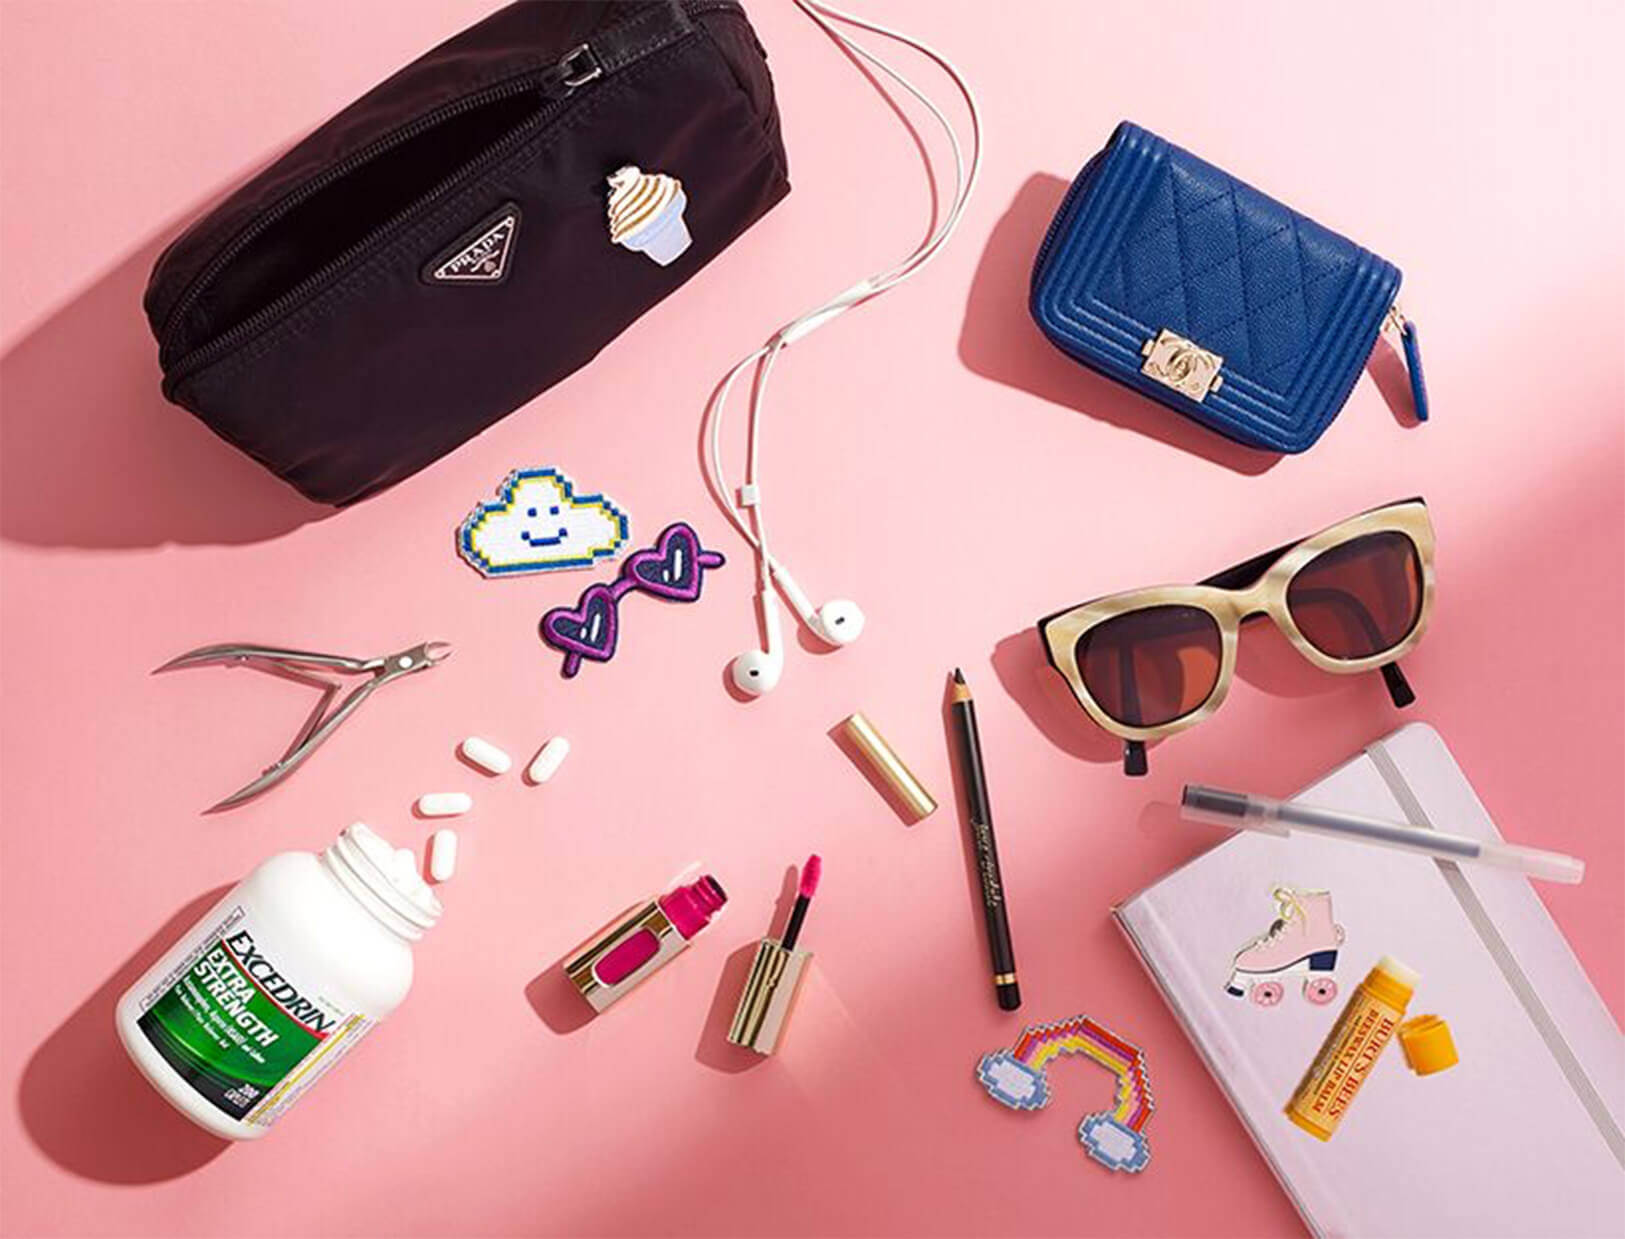 What's Inside My Work Bag?